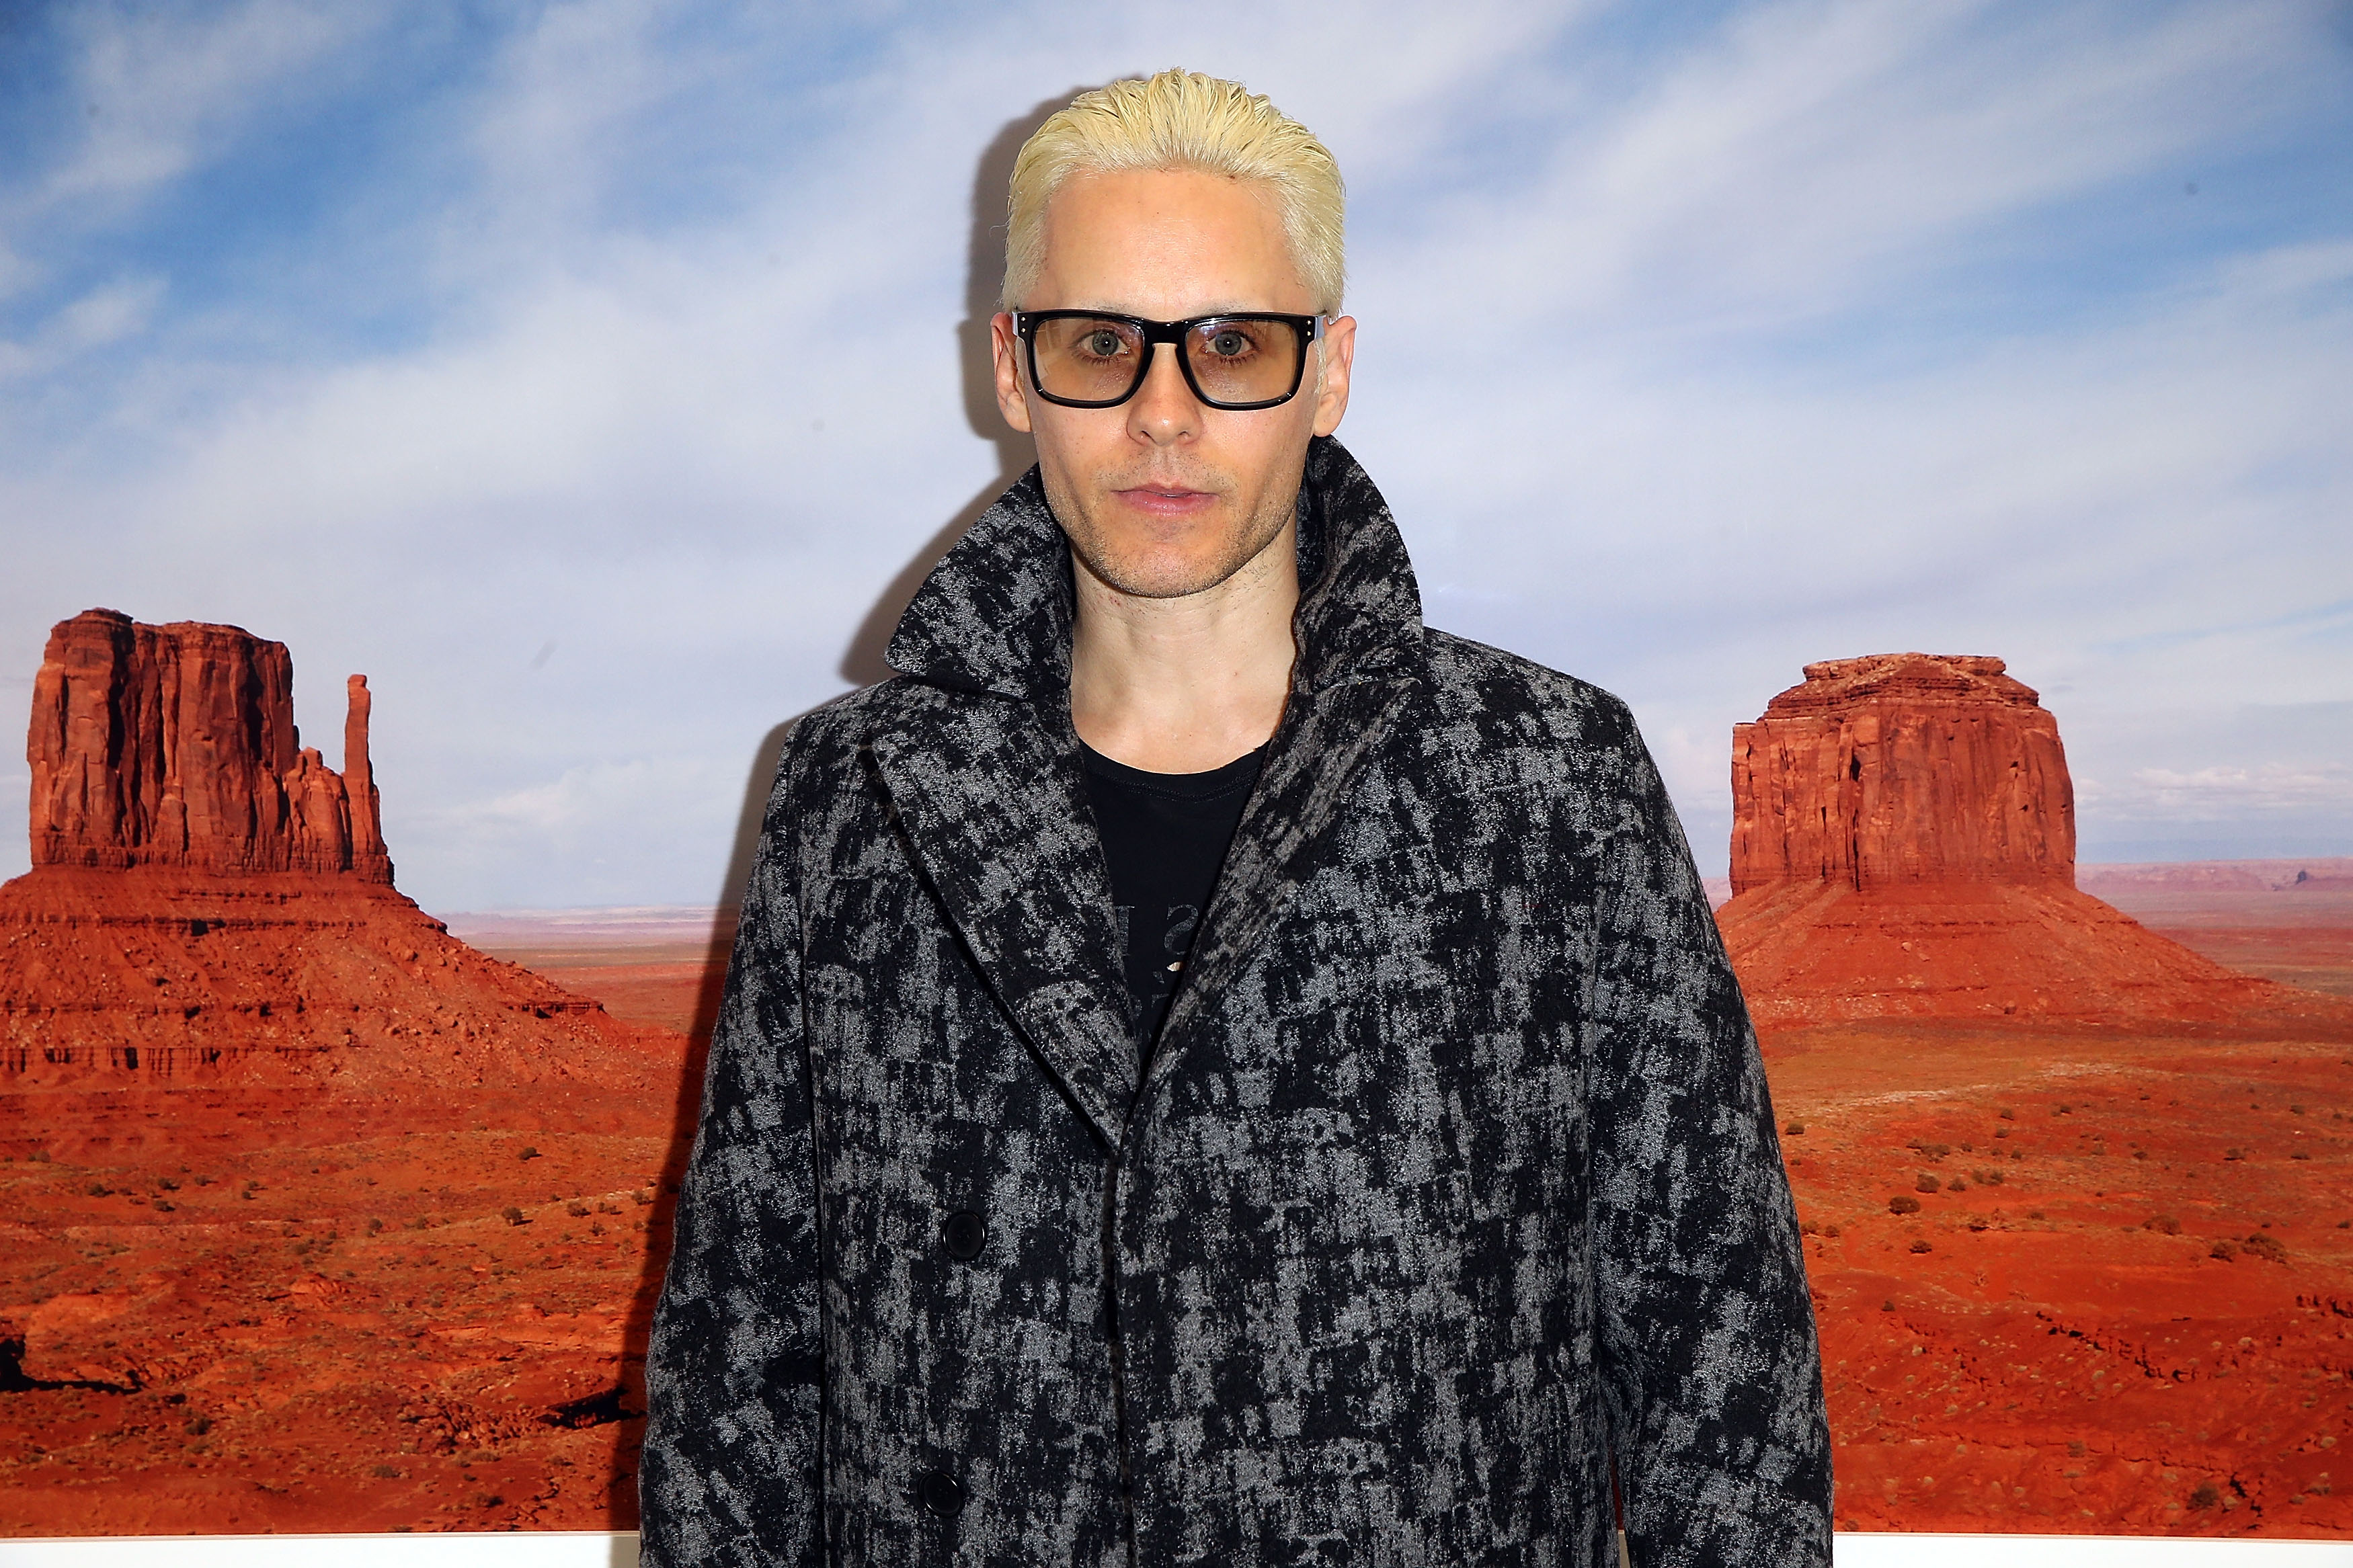 PARIS, FRANCE - MARCH 06:  Jared Leto attends Art Exibibition At Galerie Perrotin  as part of the Paris Fashion Week Womenswear Fall/Winter 2015/2016 on March 6, 2015 in Paris, France.  (Photo by Michel Dufour/Getty Images)